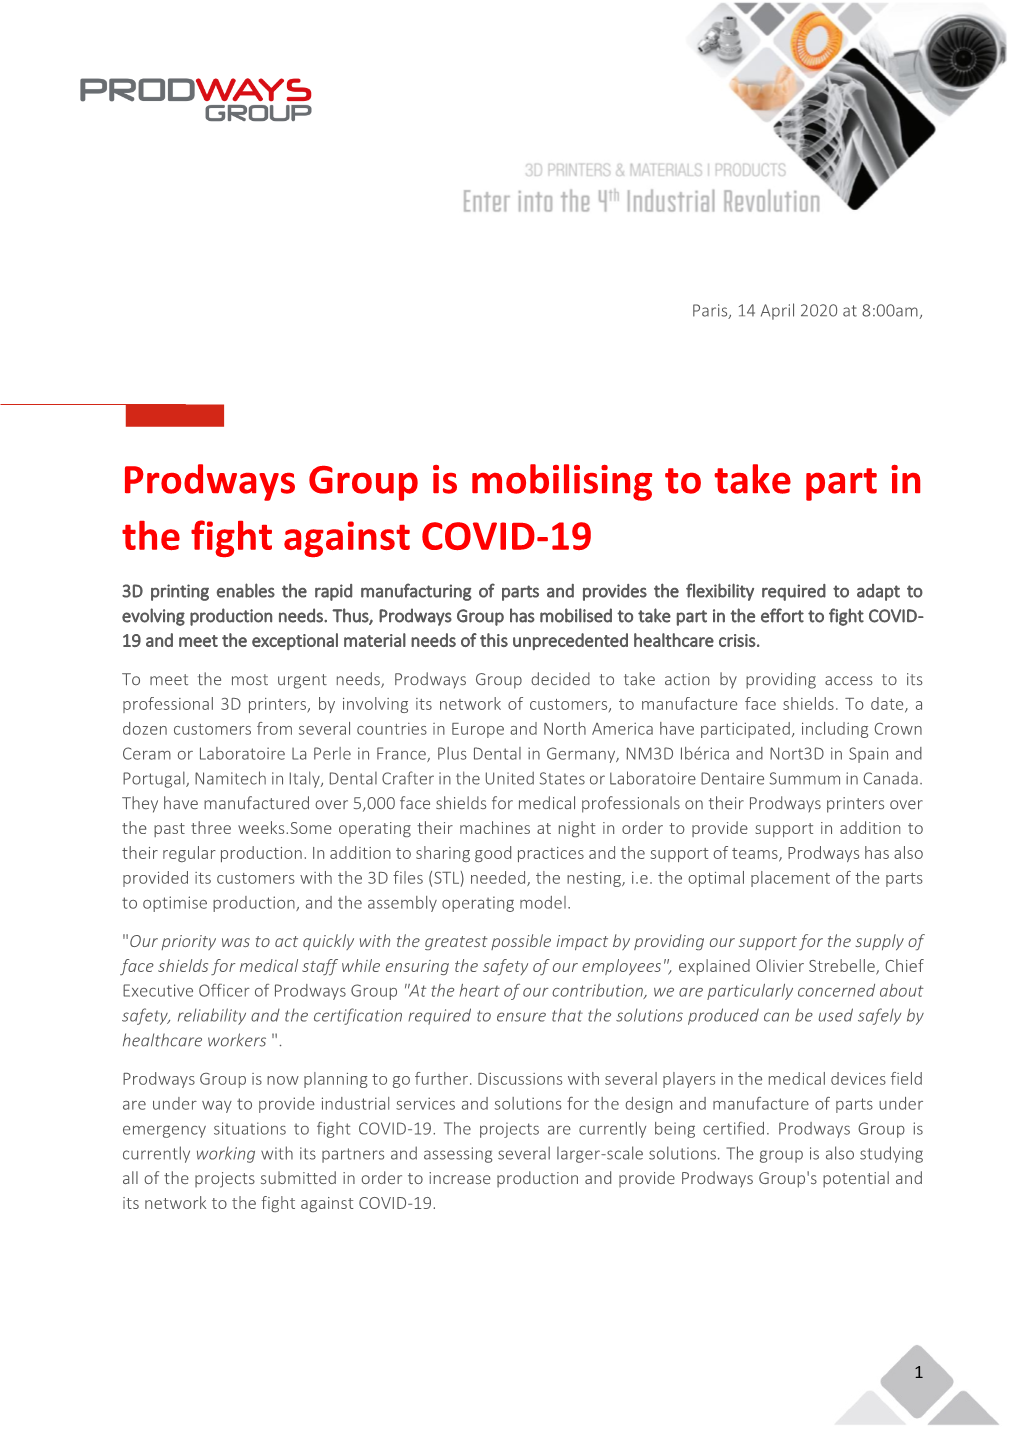 Prodways Group Is Mobilising to Take Part in the Fight Against COVID-19